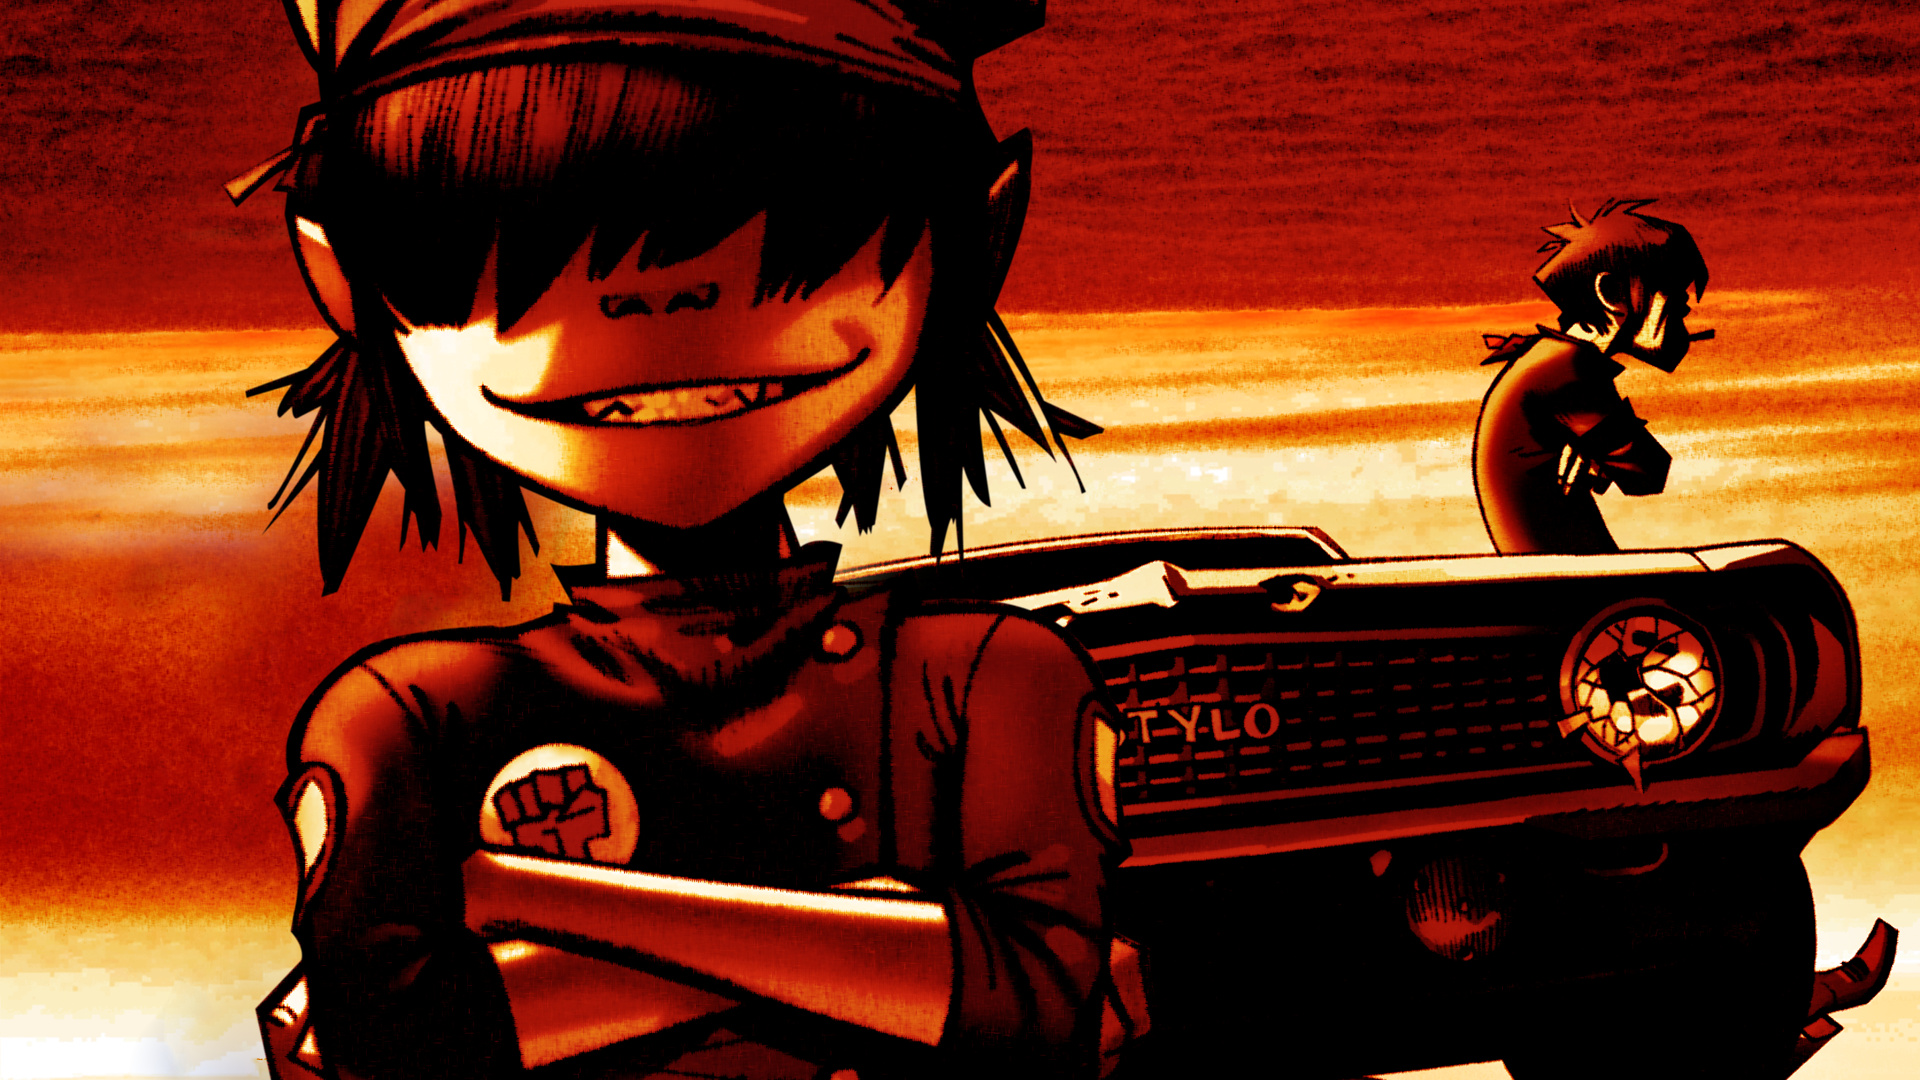 Noodle (Gorillaz): A 10-year-old Japanese girl, The 2005 album, Demon Days. 1920x1080 Full HD Background.